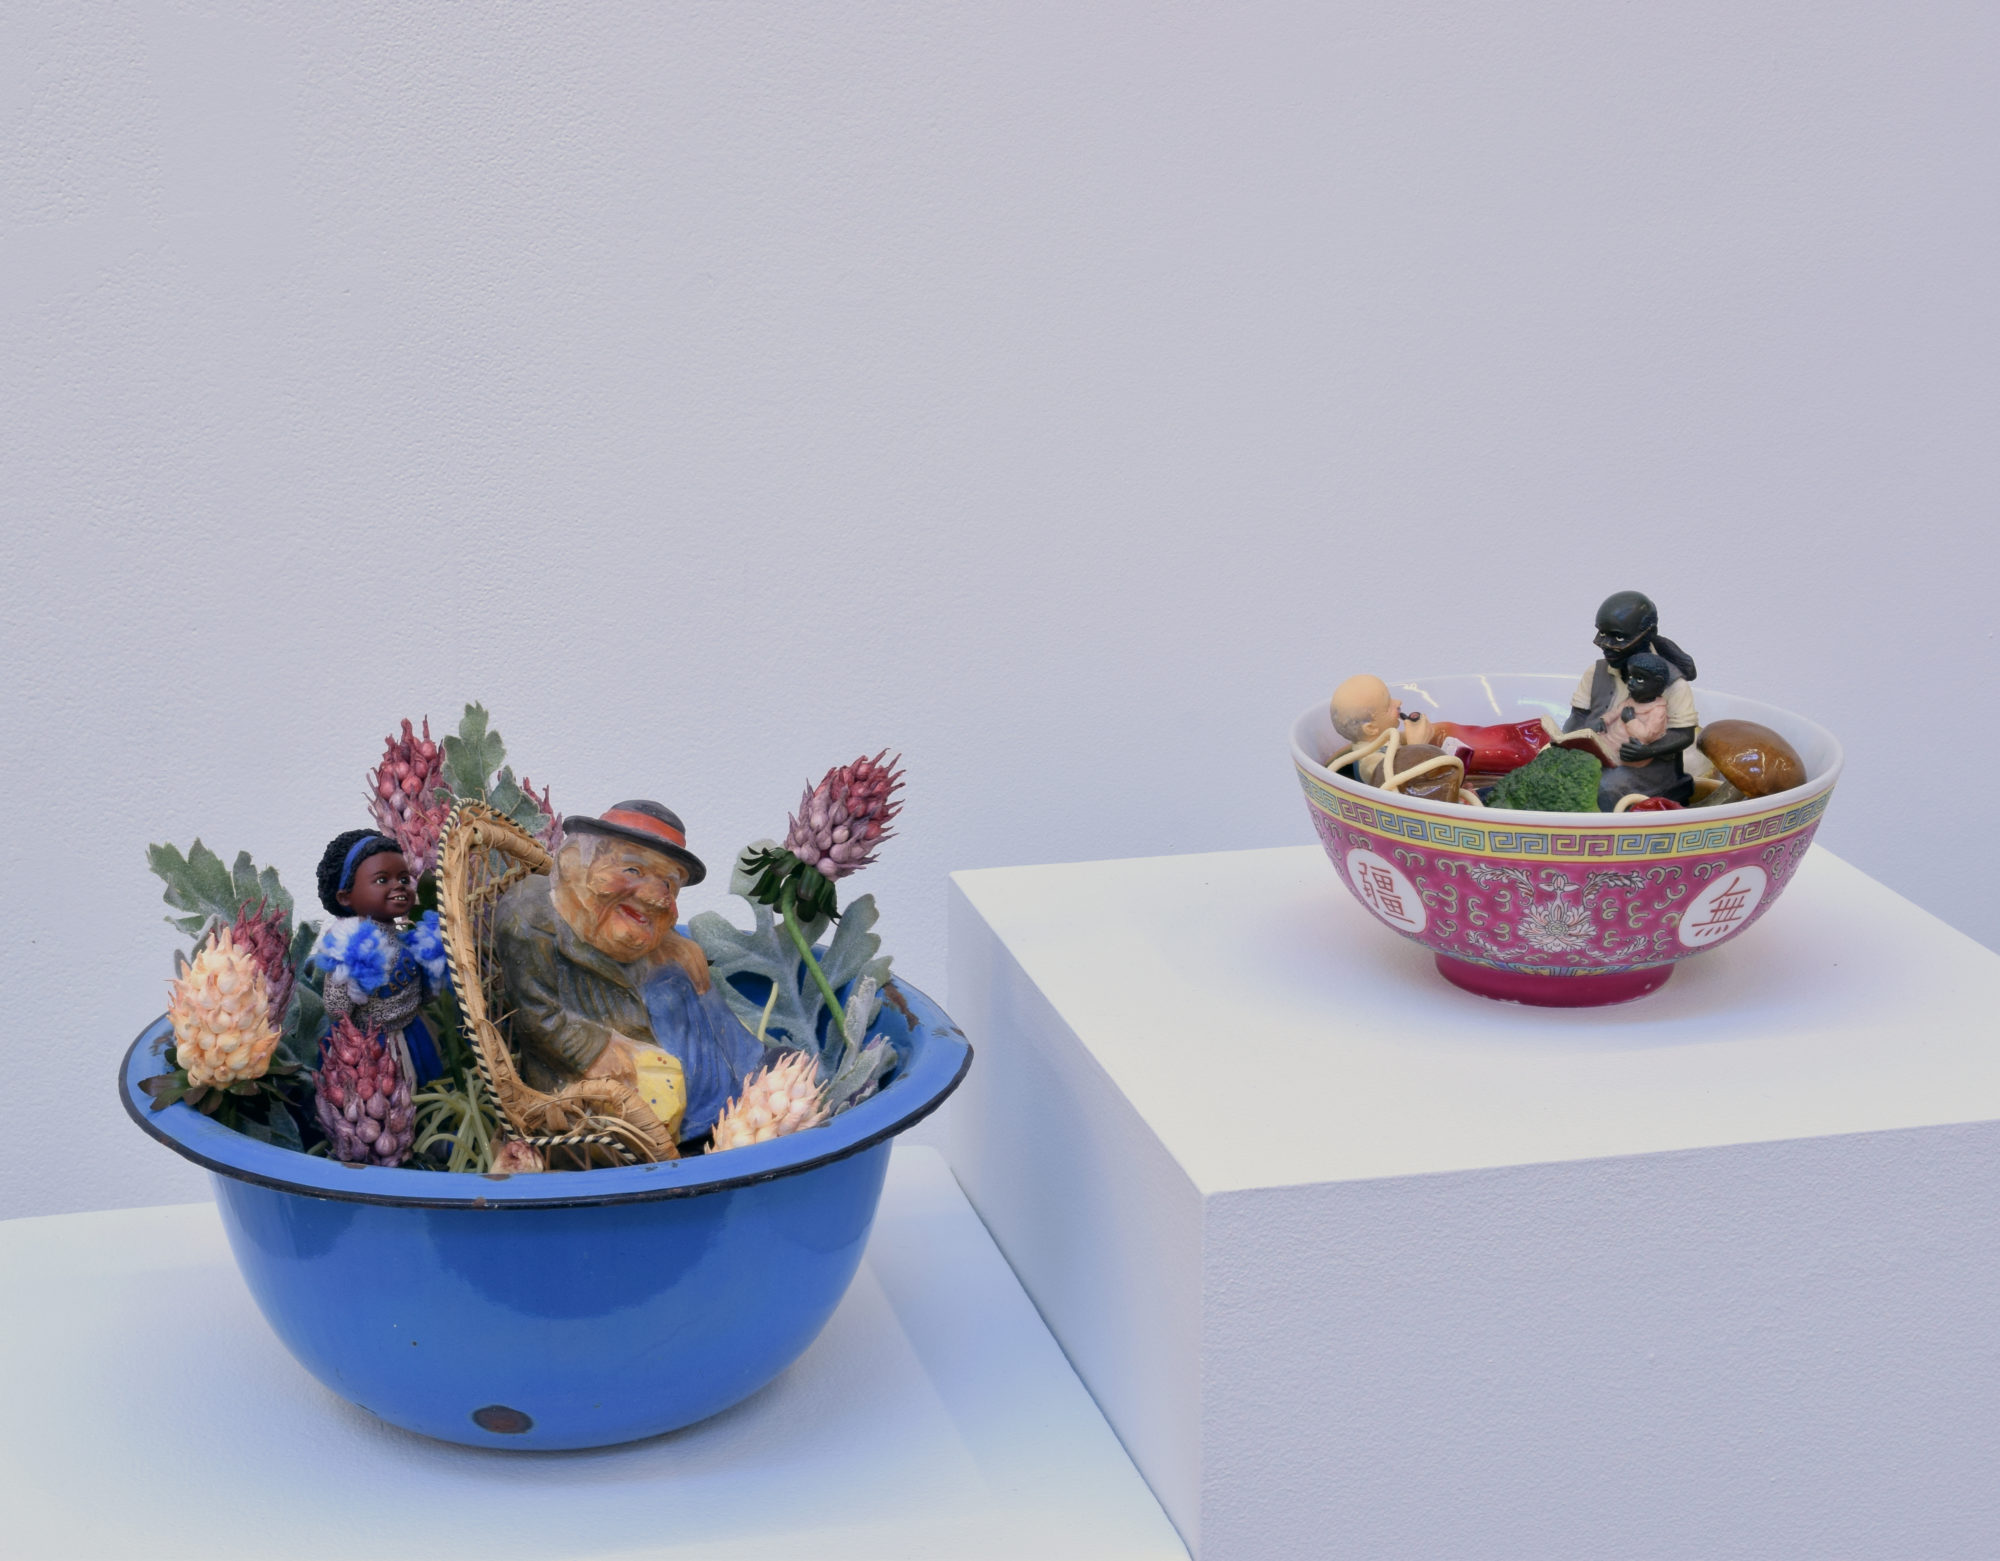 Close up of two sculptures, small dioramas in bowls, from It Can Howl